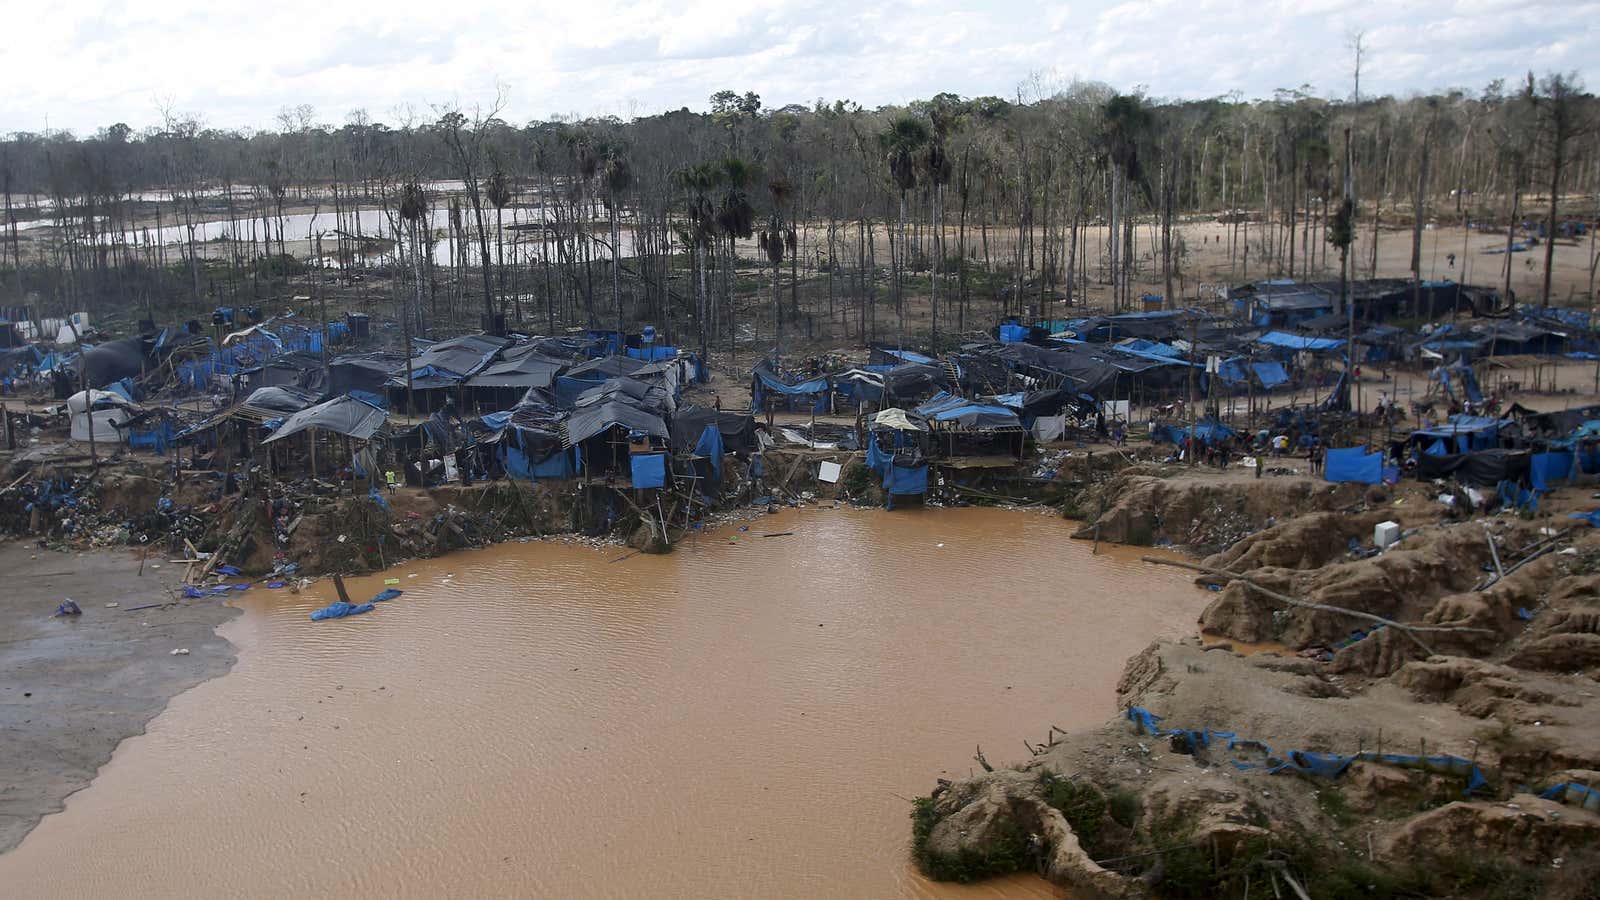 An illegal gold mining camp in a zone known as Mega 14, in the southern Amazon region of Madre de Dios